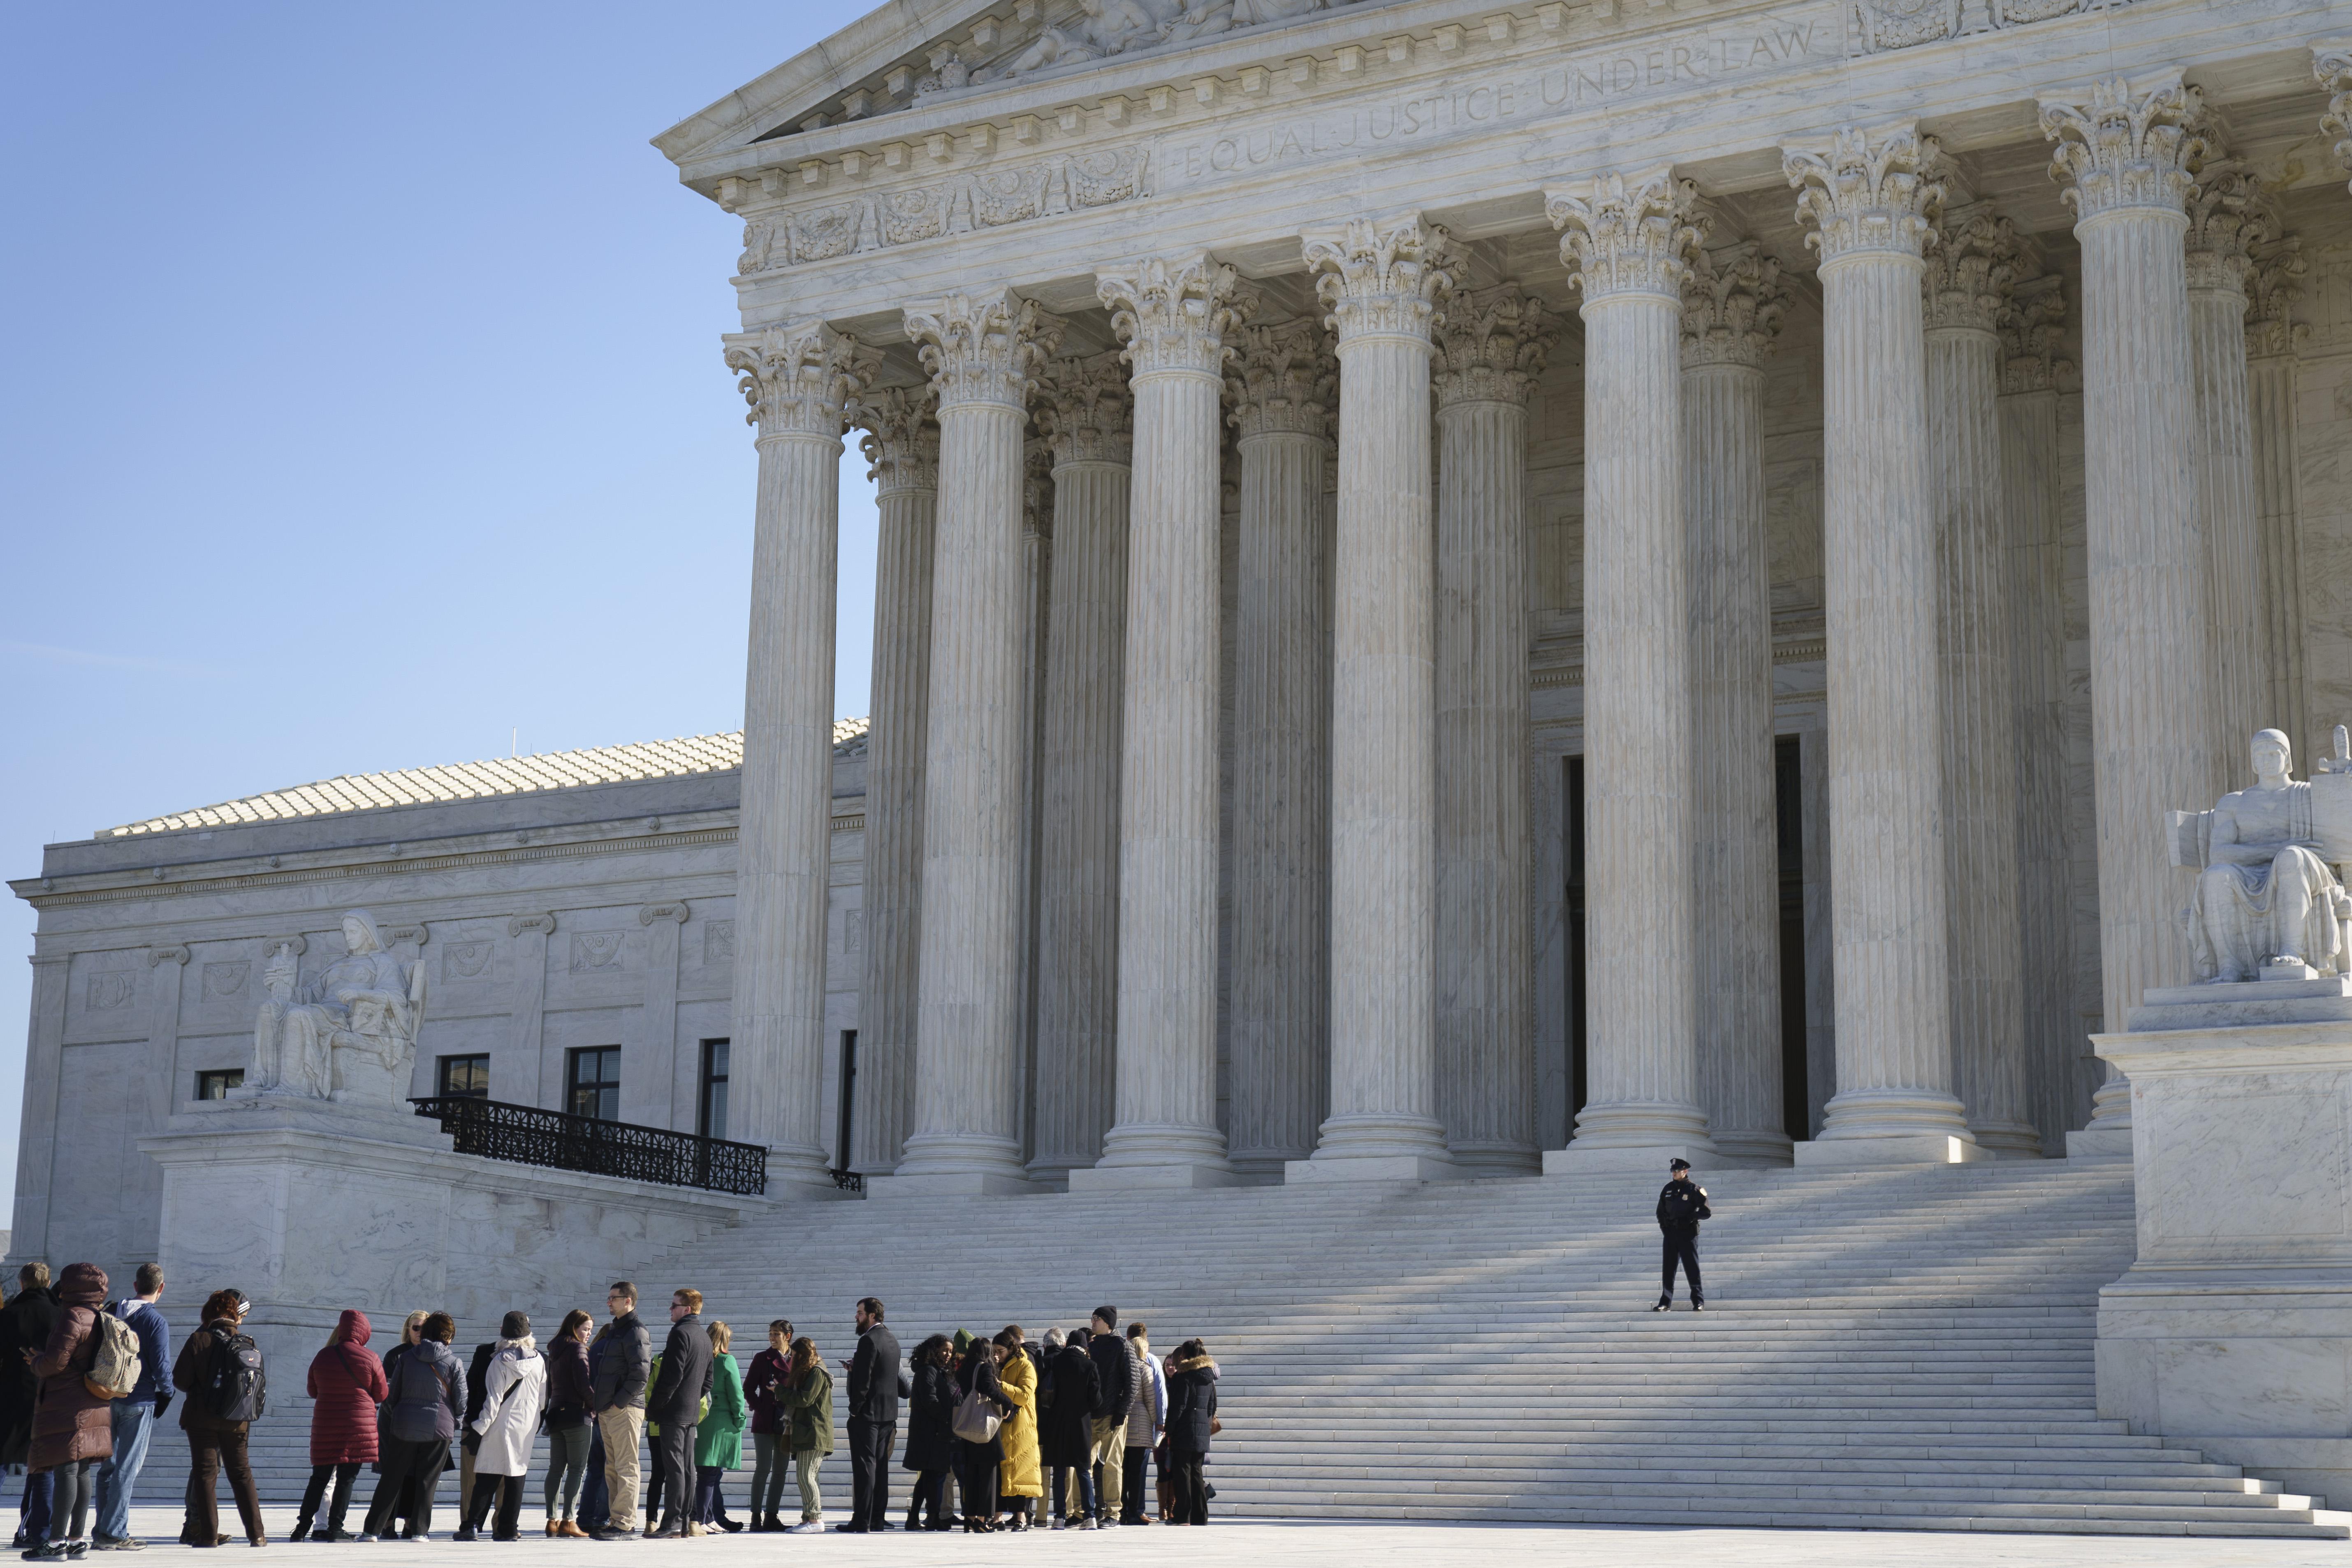 People wait in line to get into the Supreme Court